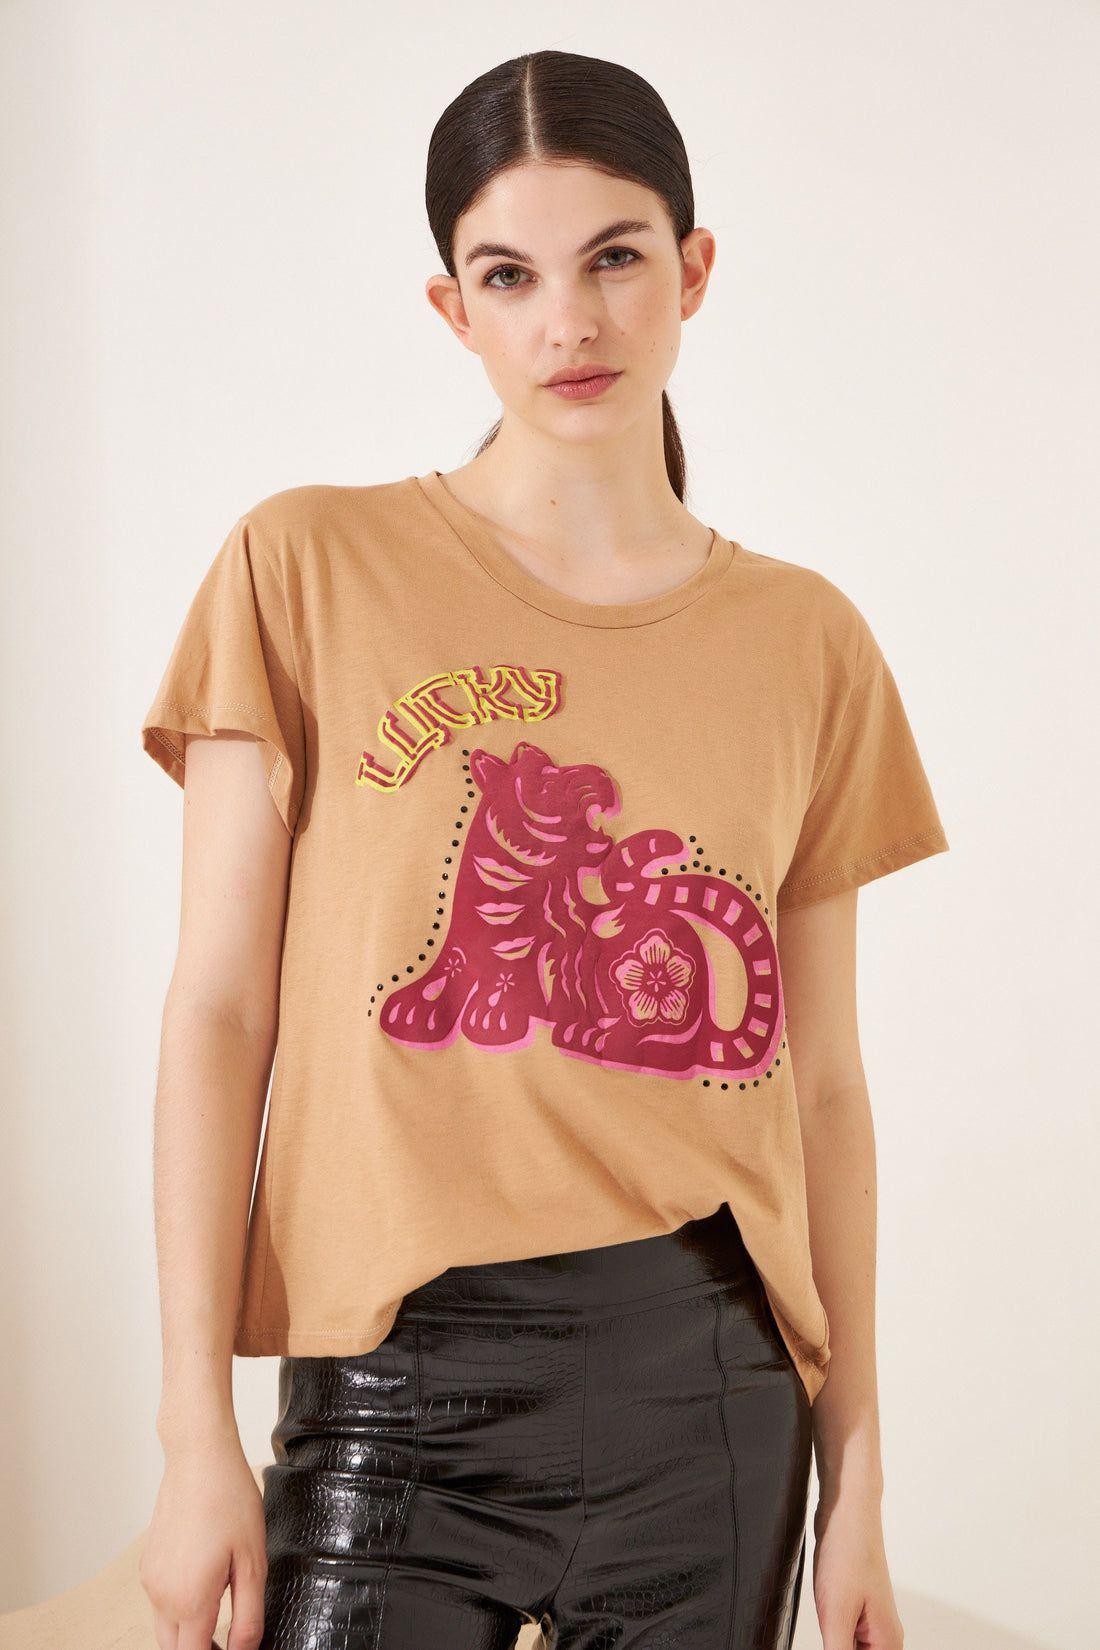 REMERA LUCKY camel s/m